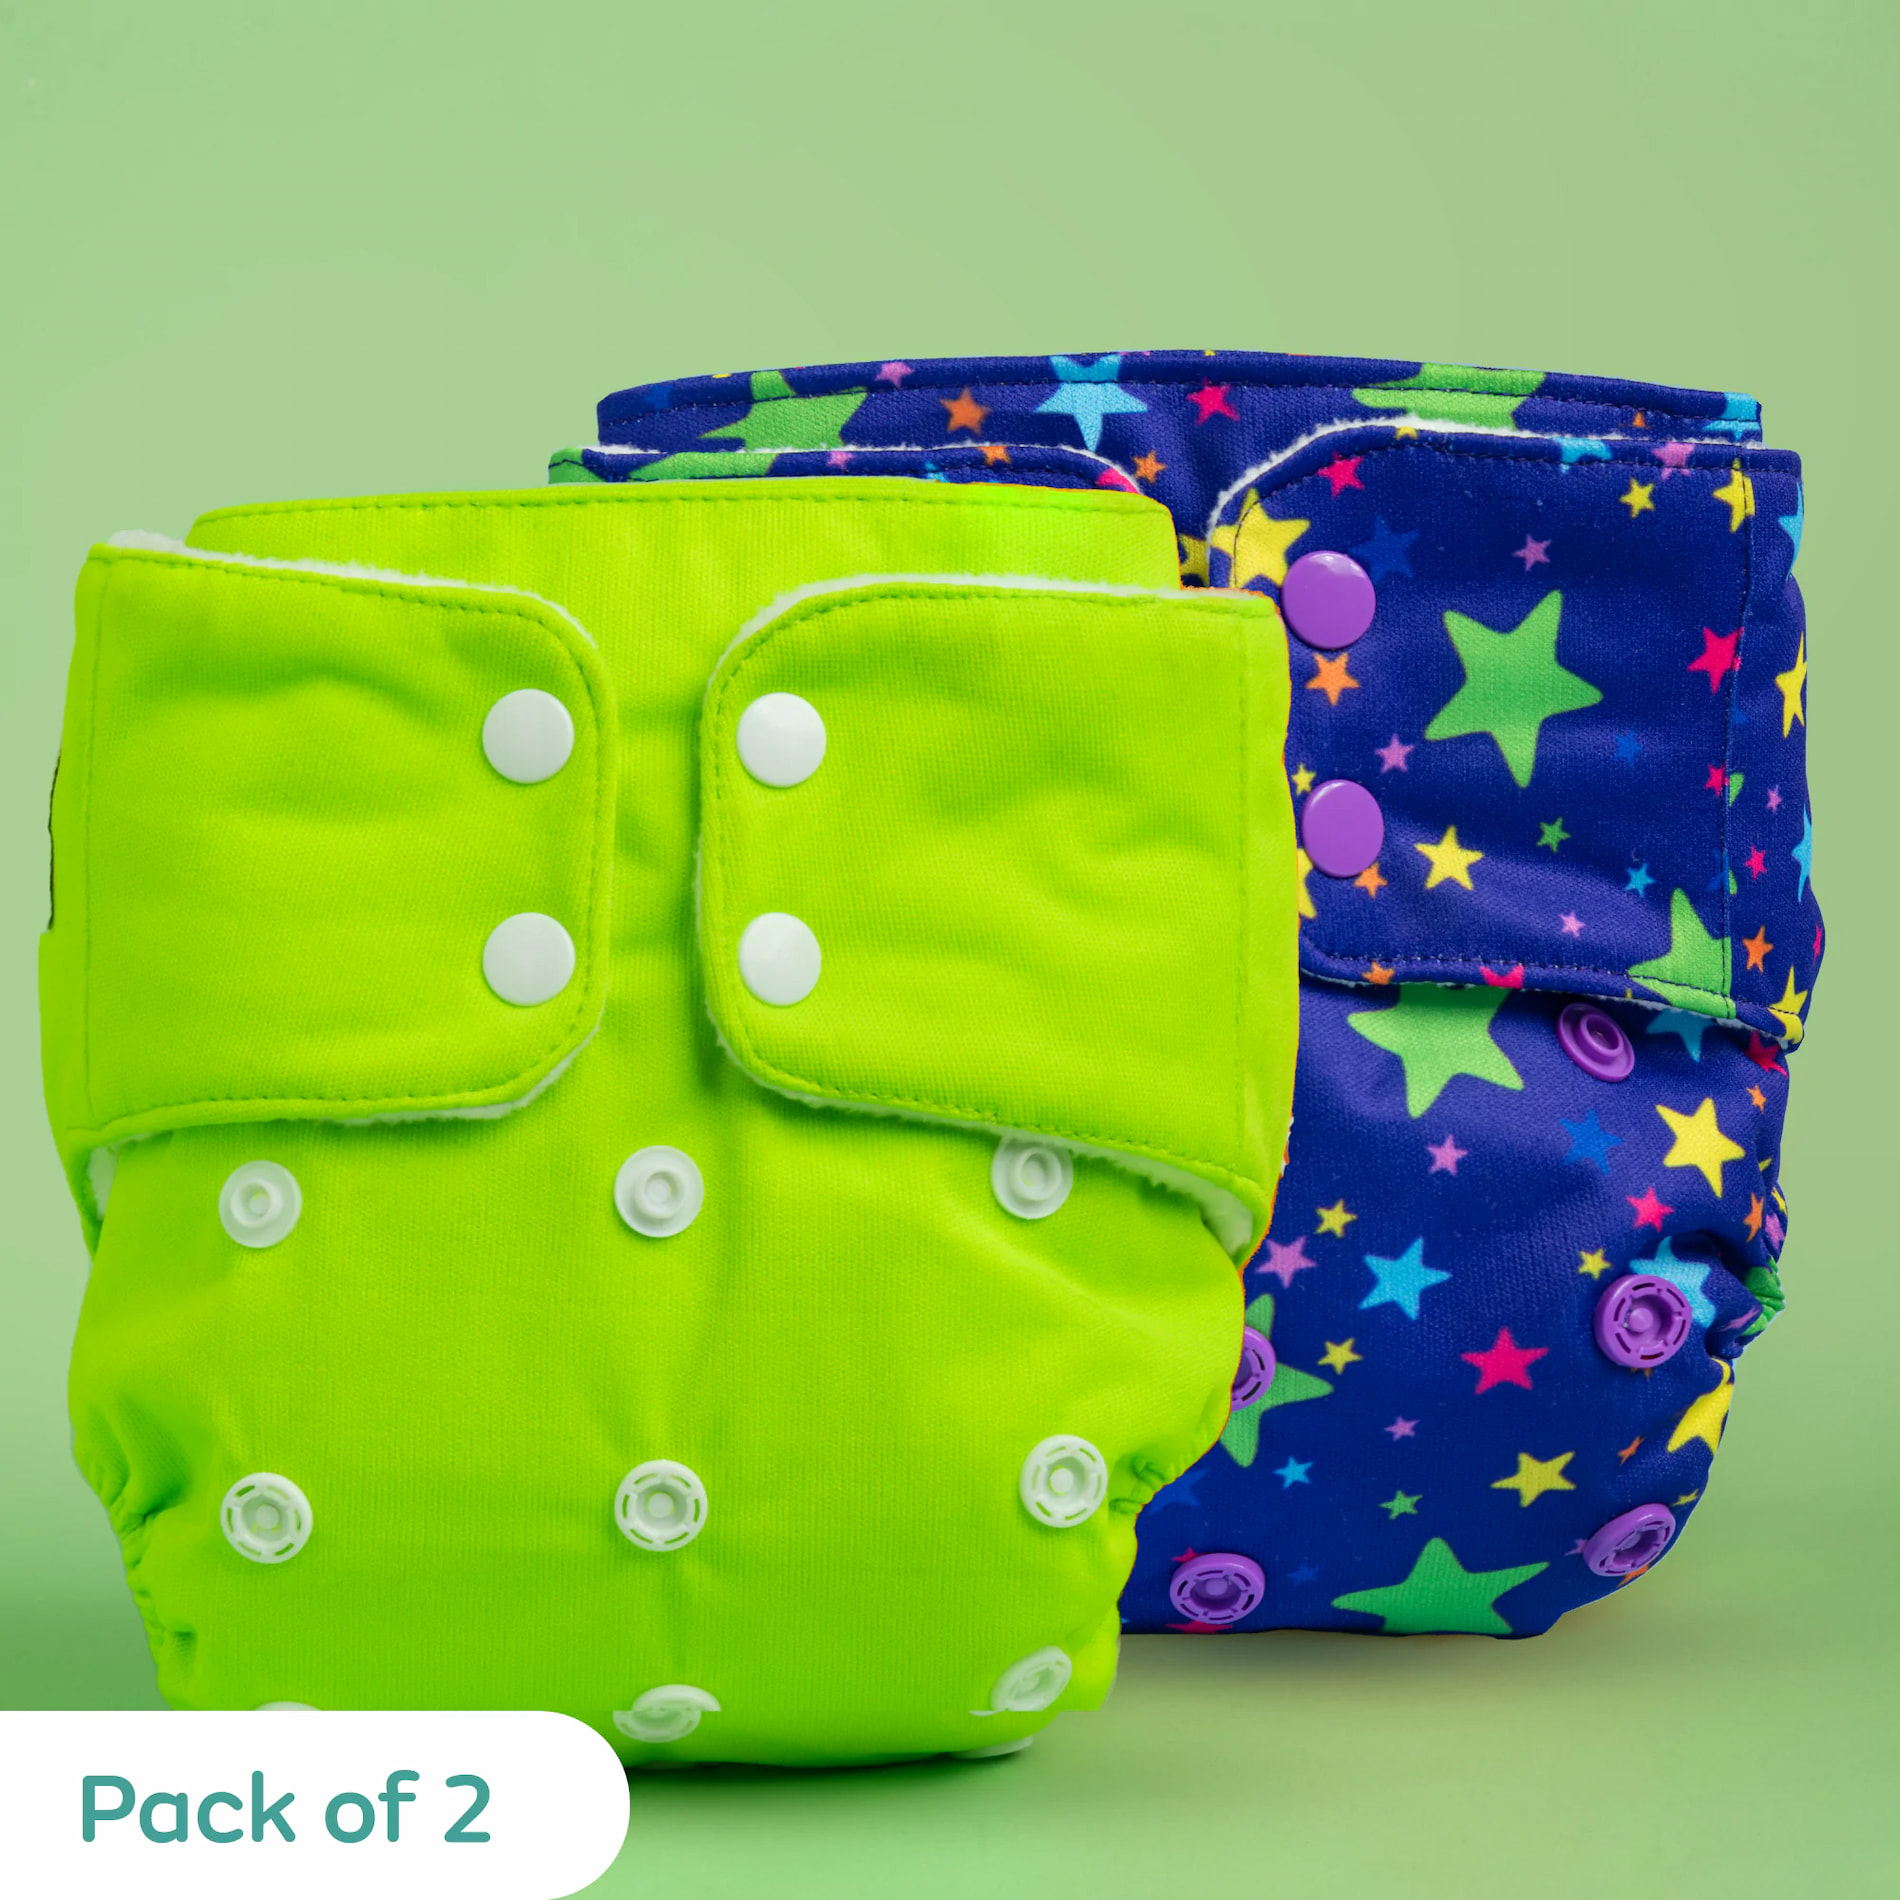 Adjustable & Reusable Cloth Diapers with 2 Insert Pads - Twinkle Print + Green Solid - Pack of 2